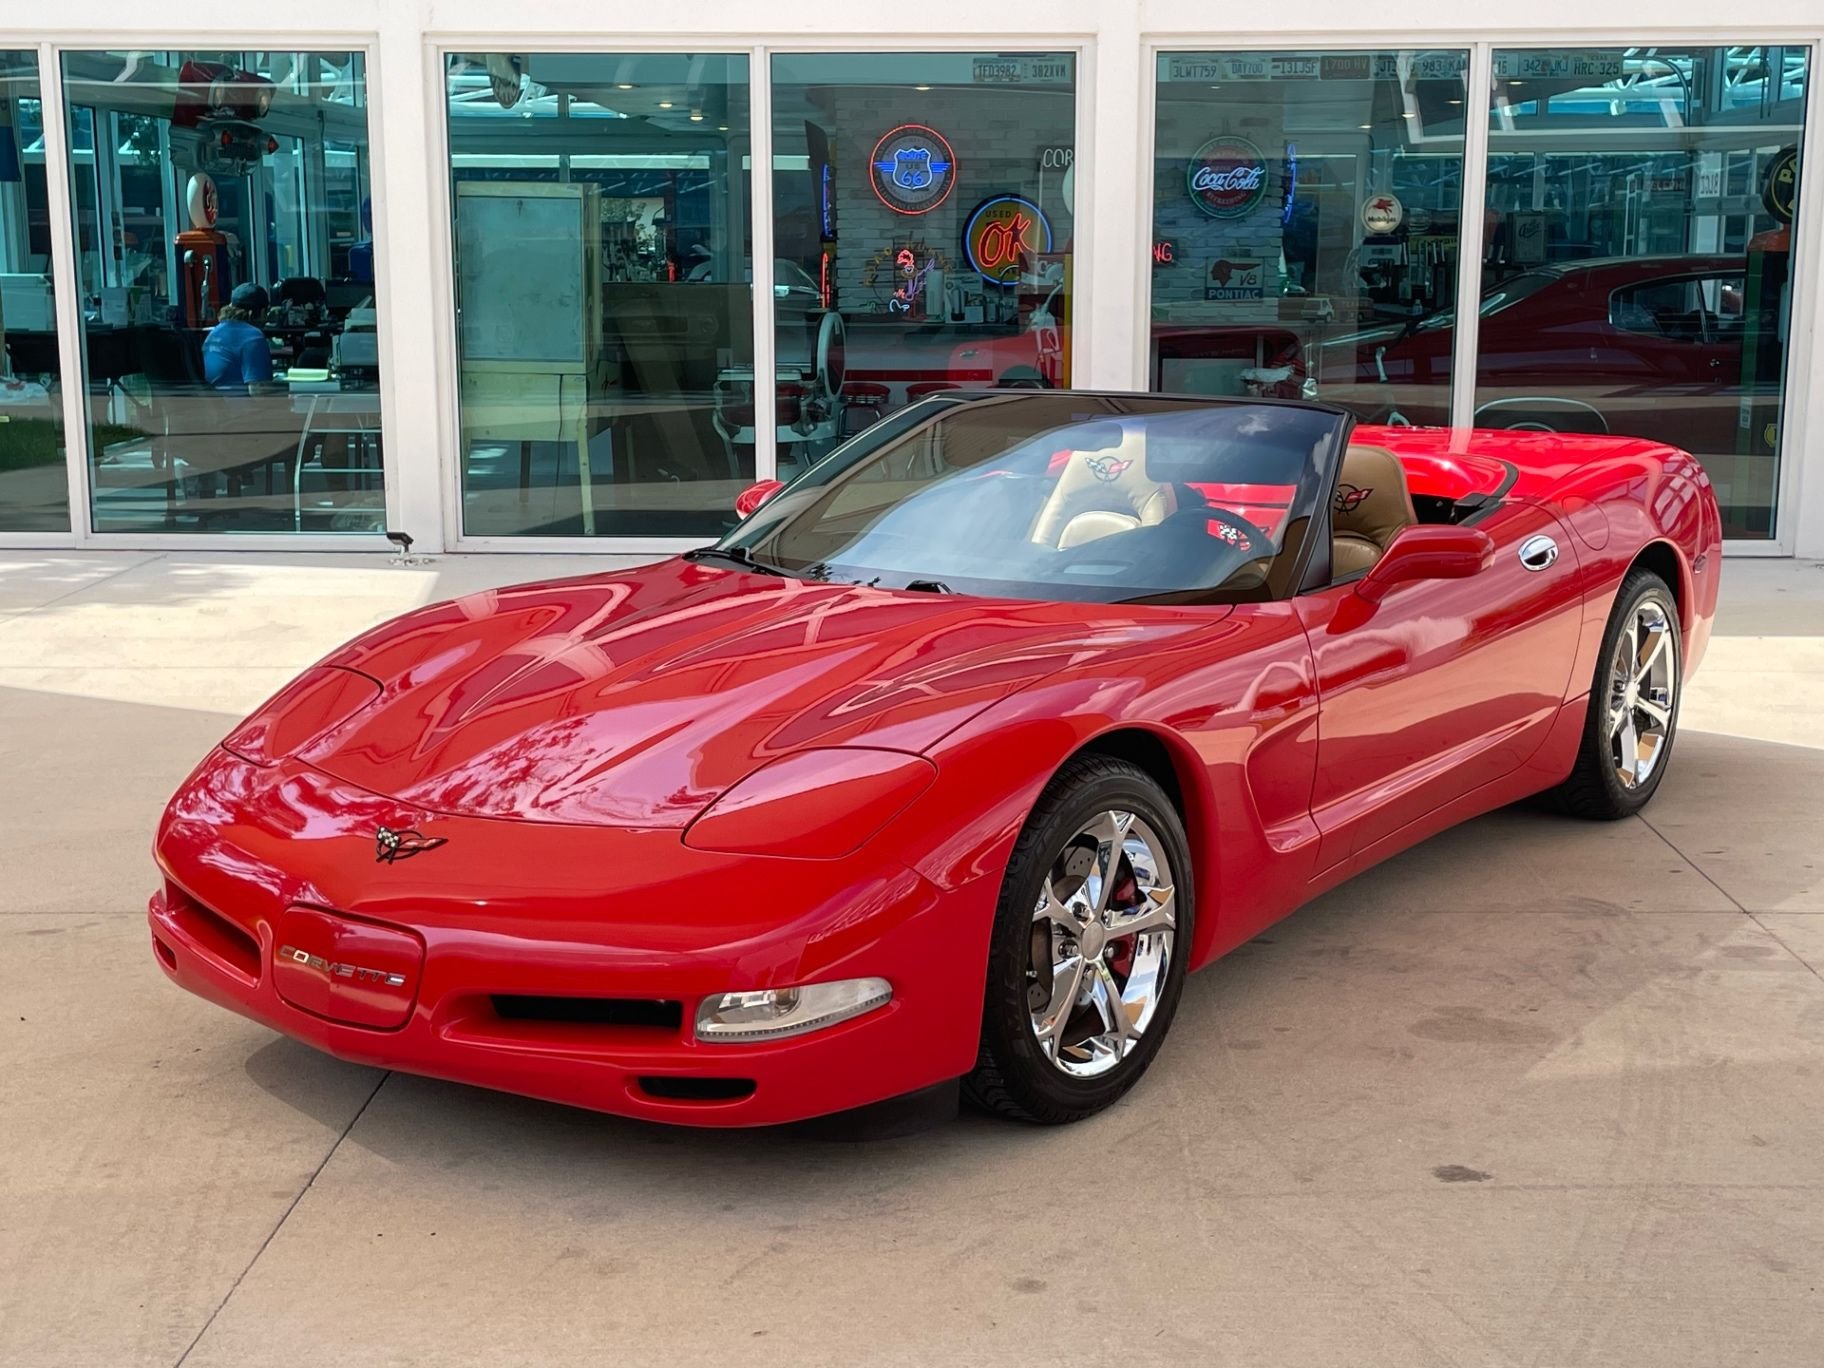 2000 Chevrolet Corvette Classic Cars And Used Cars For Sale In Tampa Fl